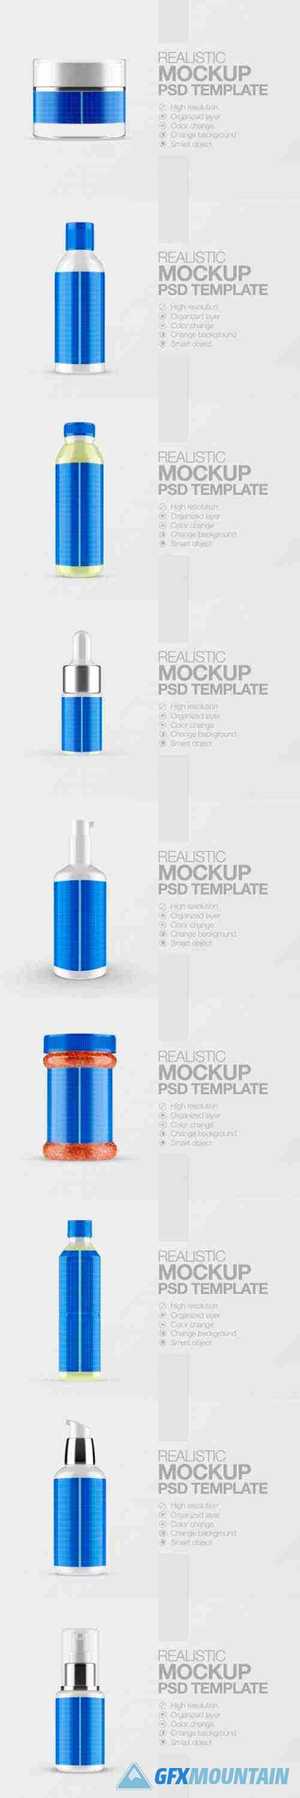 Realistic bottle packaging container mockup